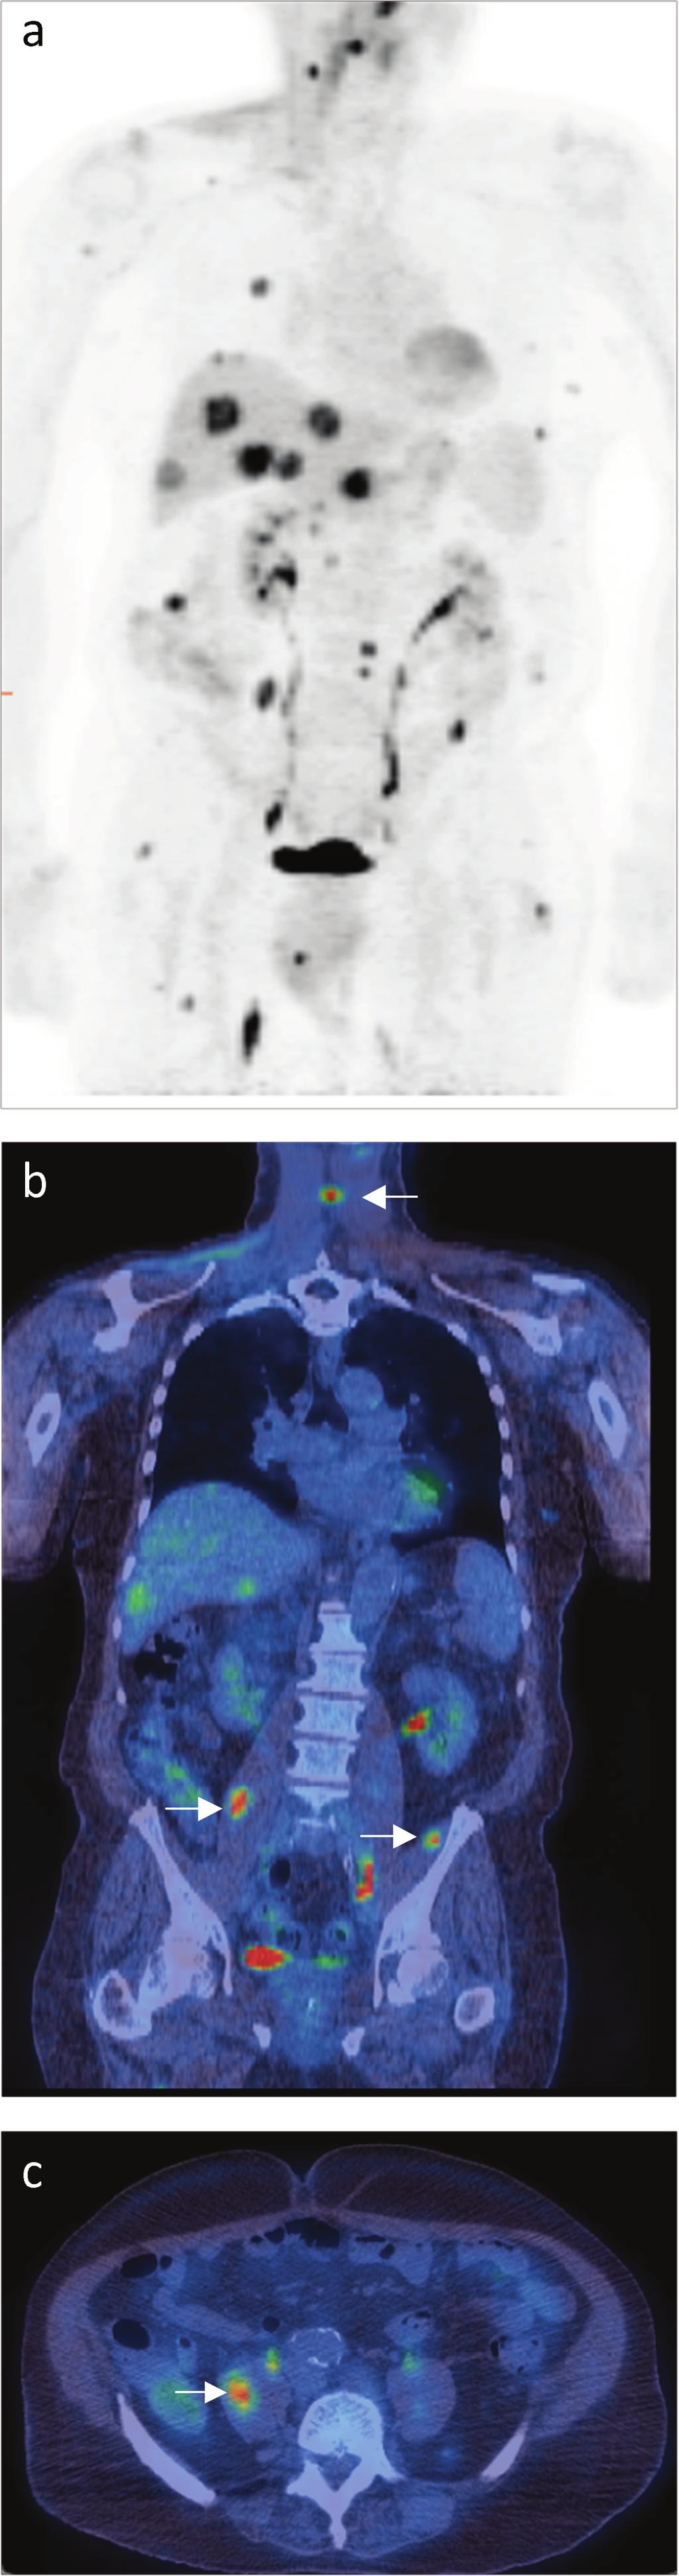 Pancreatic cancer Genitourinary cancers The sensitivity and specificity of 18F-FDGPET/CT is diminished in patients with pancreatic masses when inflammatory markers are raised (false-positives with